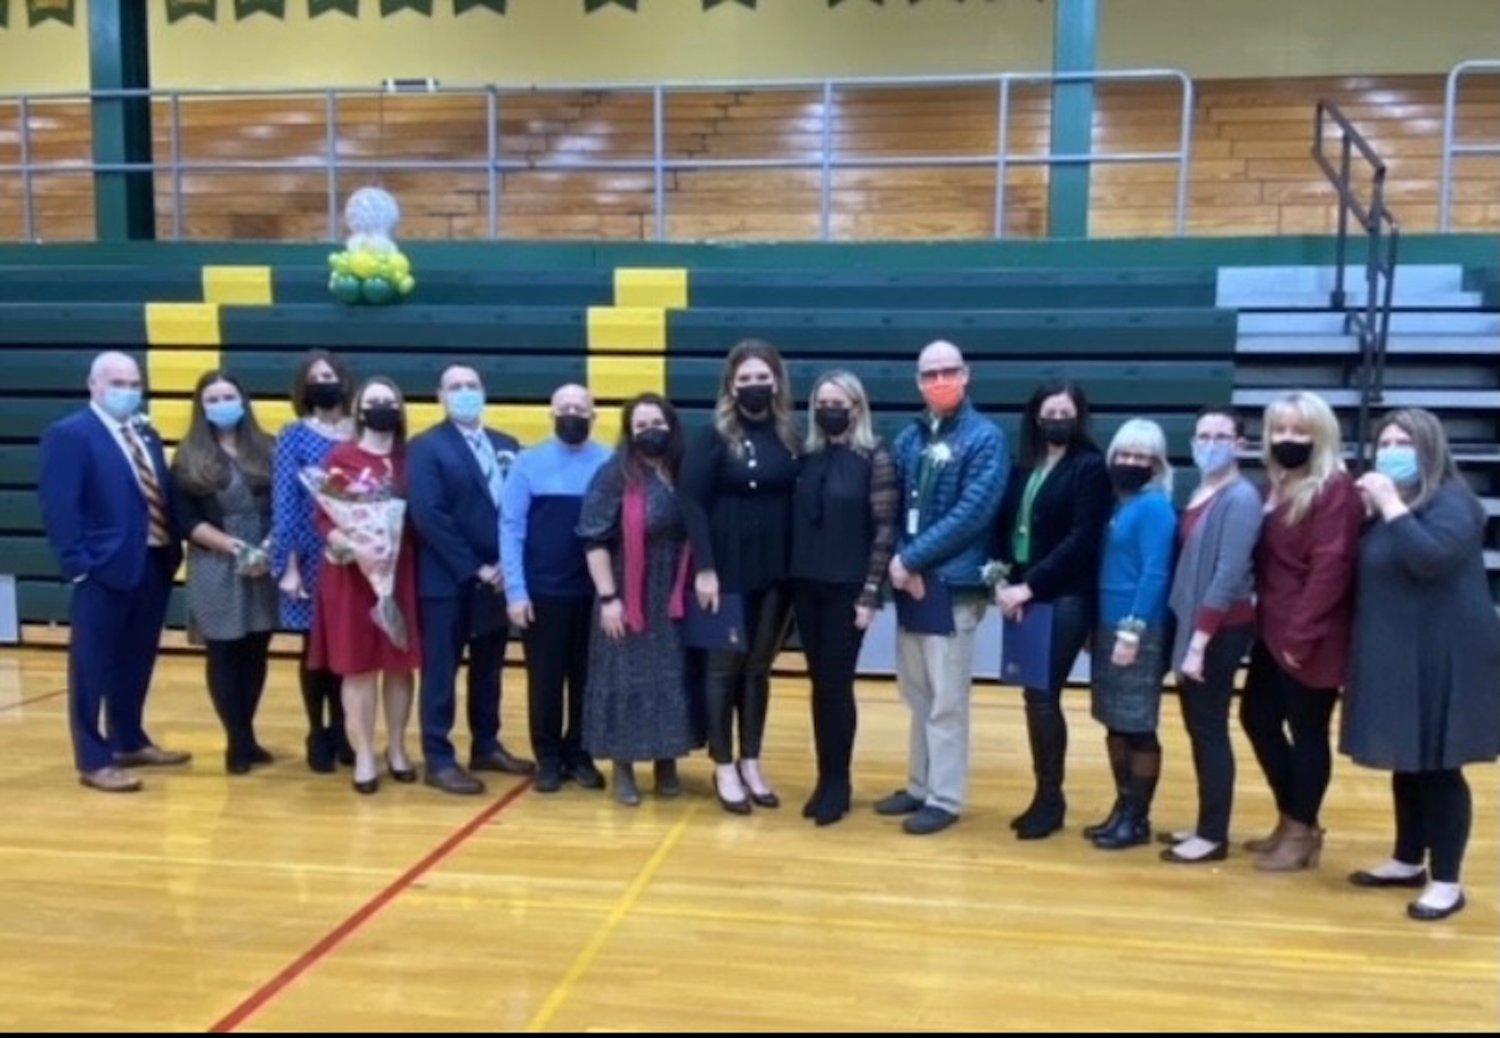 The Lynbrook School District honored those who give back to the community by volunteering in the PTA with a Founders’ Day celebration Feb. 1.